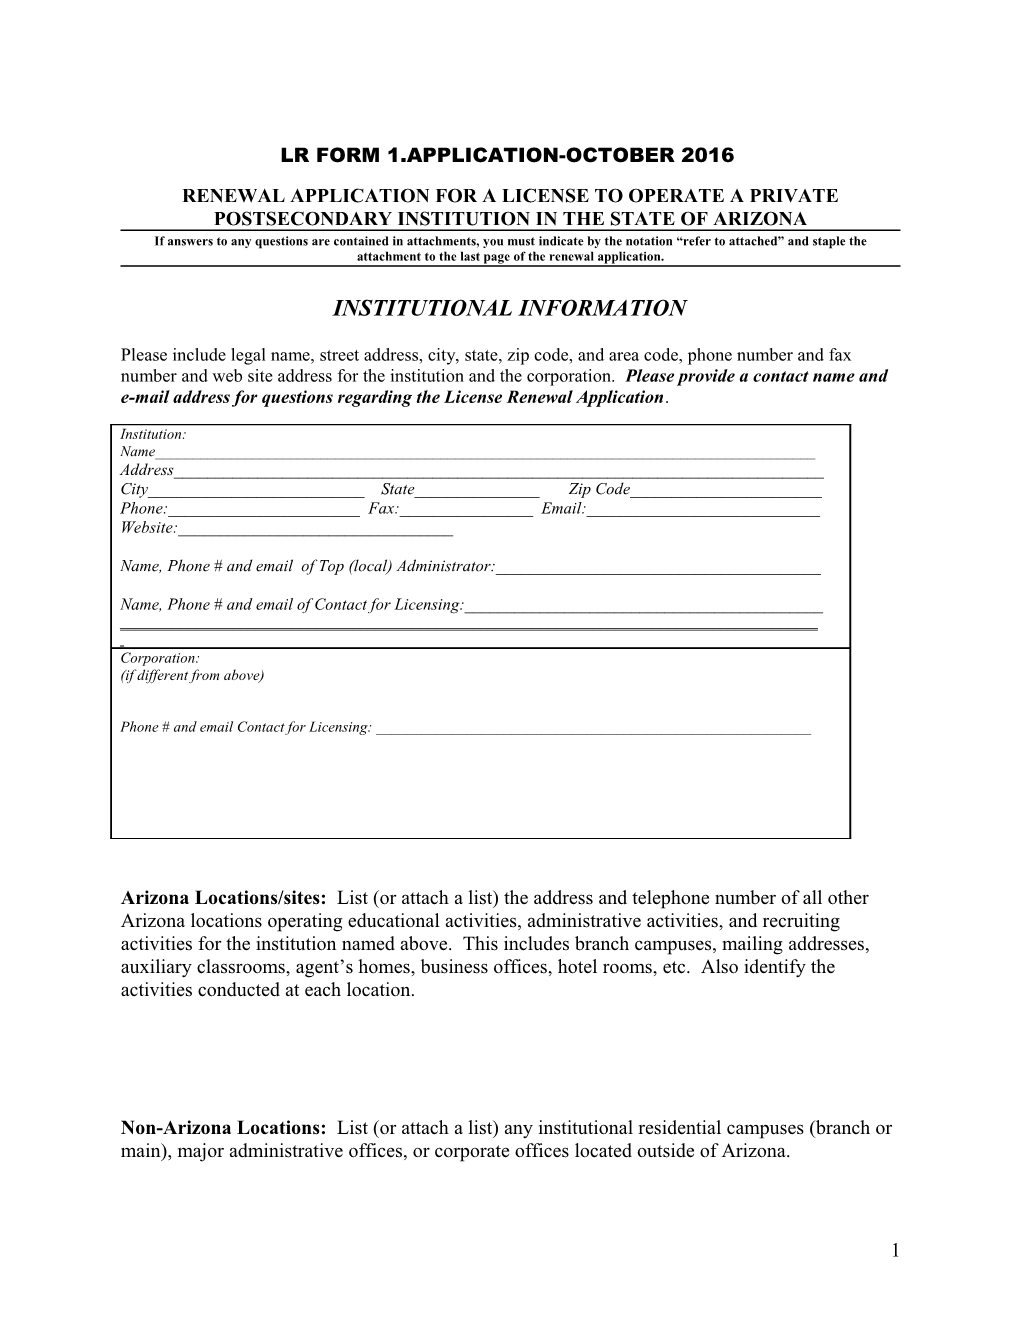 Renewal Application for a License to Operate a Private Postsecondary Institution in The